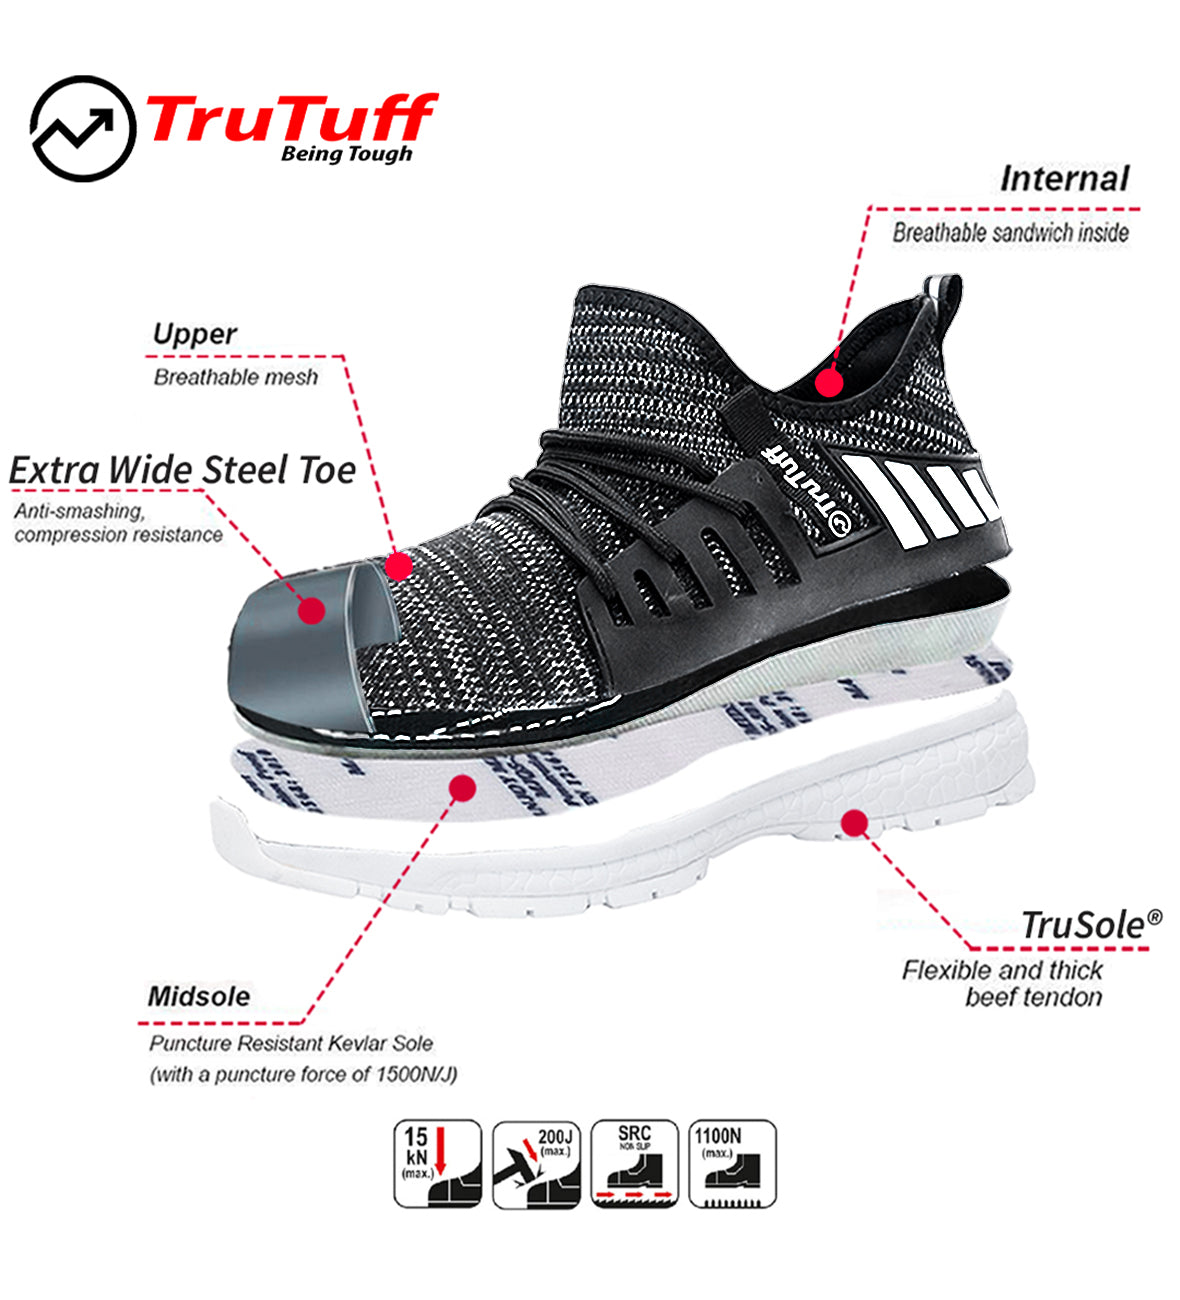 trutuff safety shoes for men and women